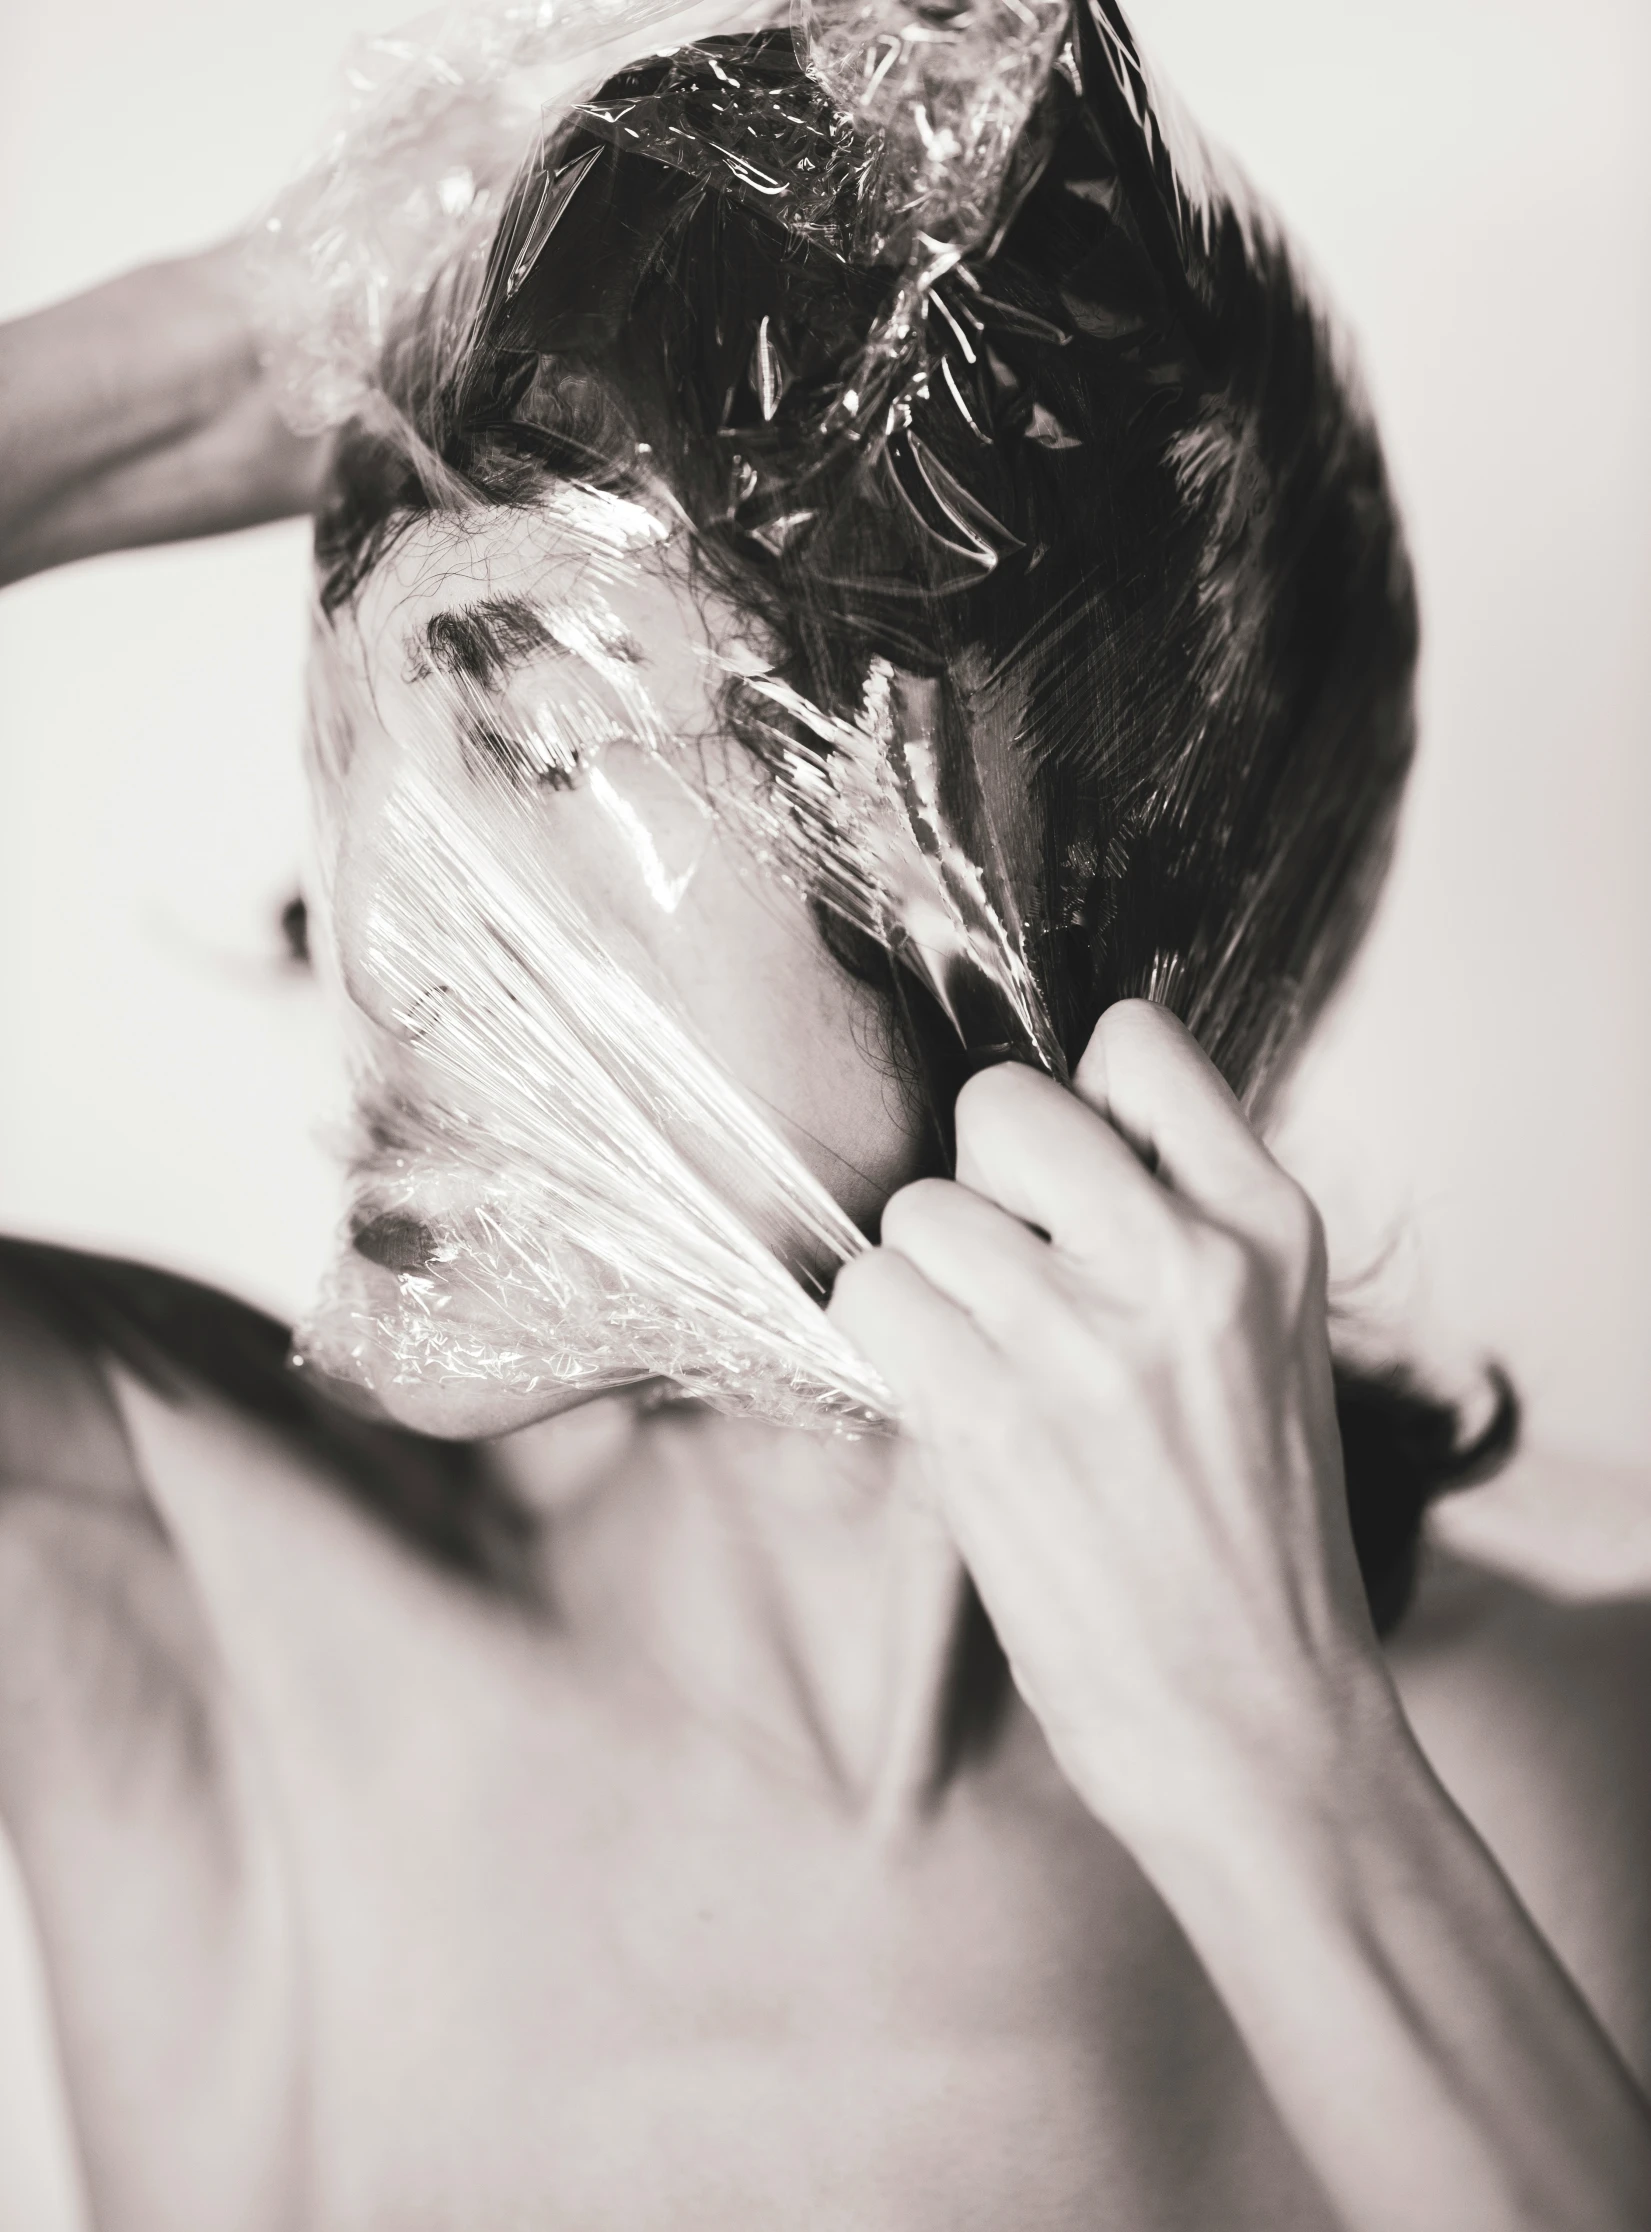 a man wiping down a plastic bag with scissors